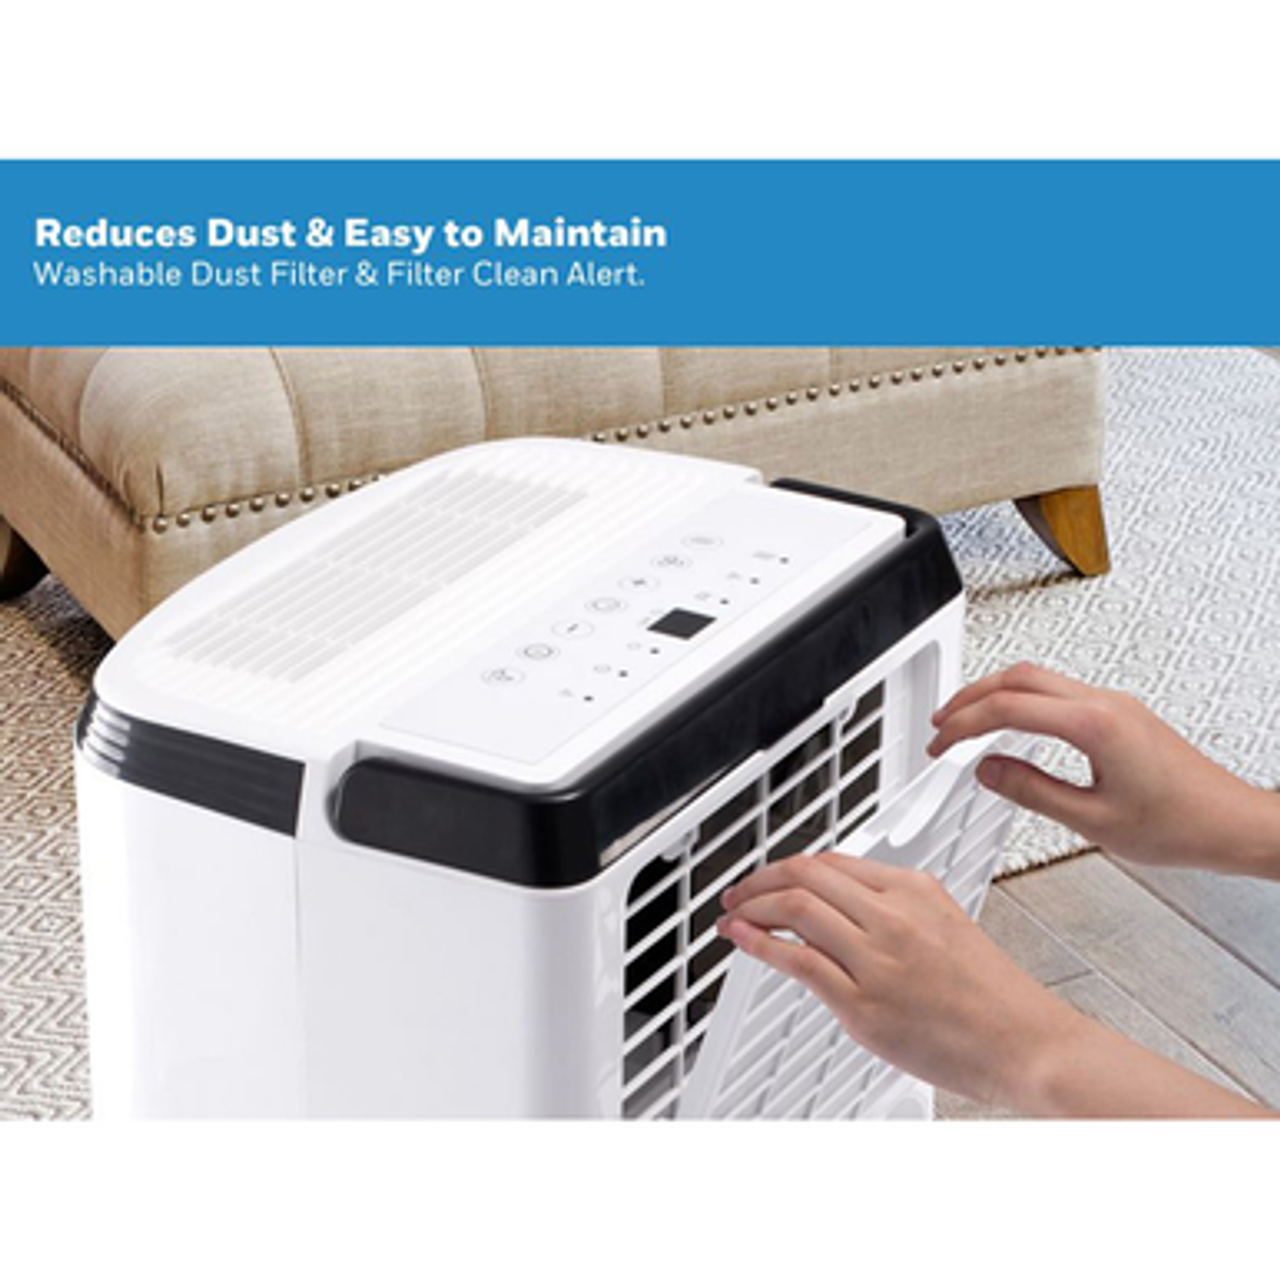 Smart 70-pint dehumidifier washable dust filters